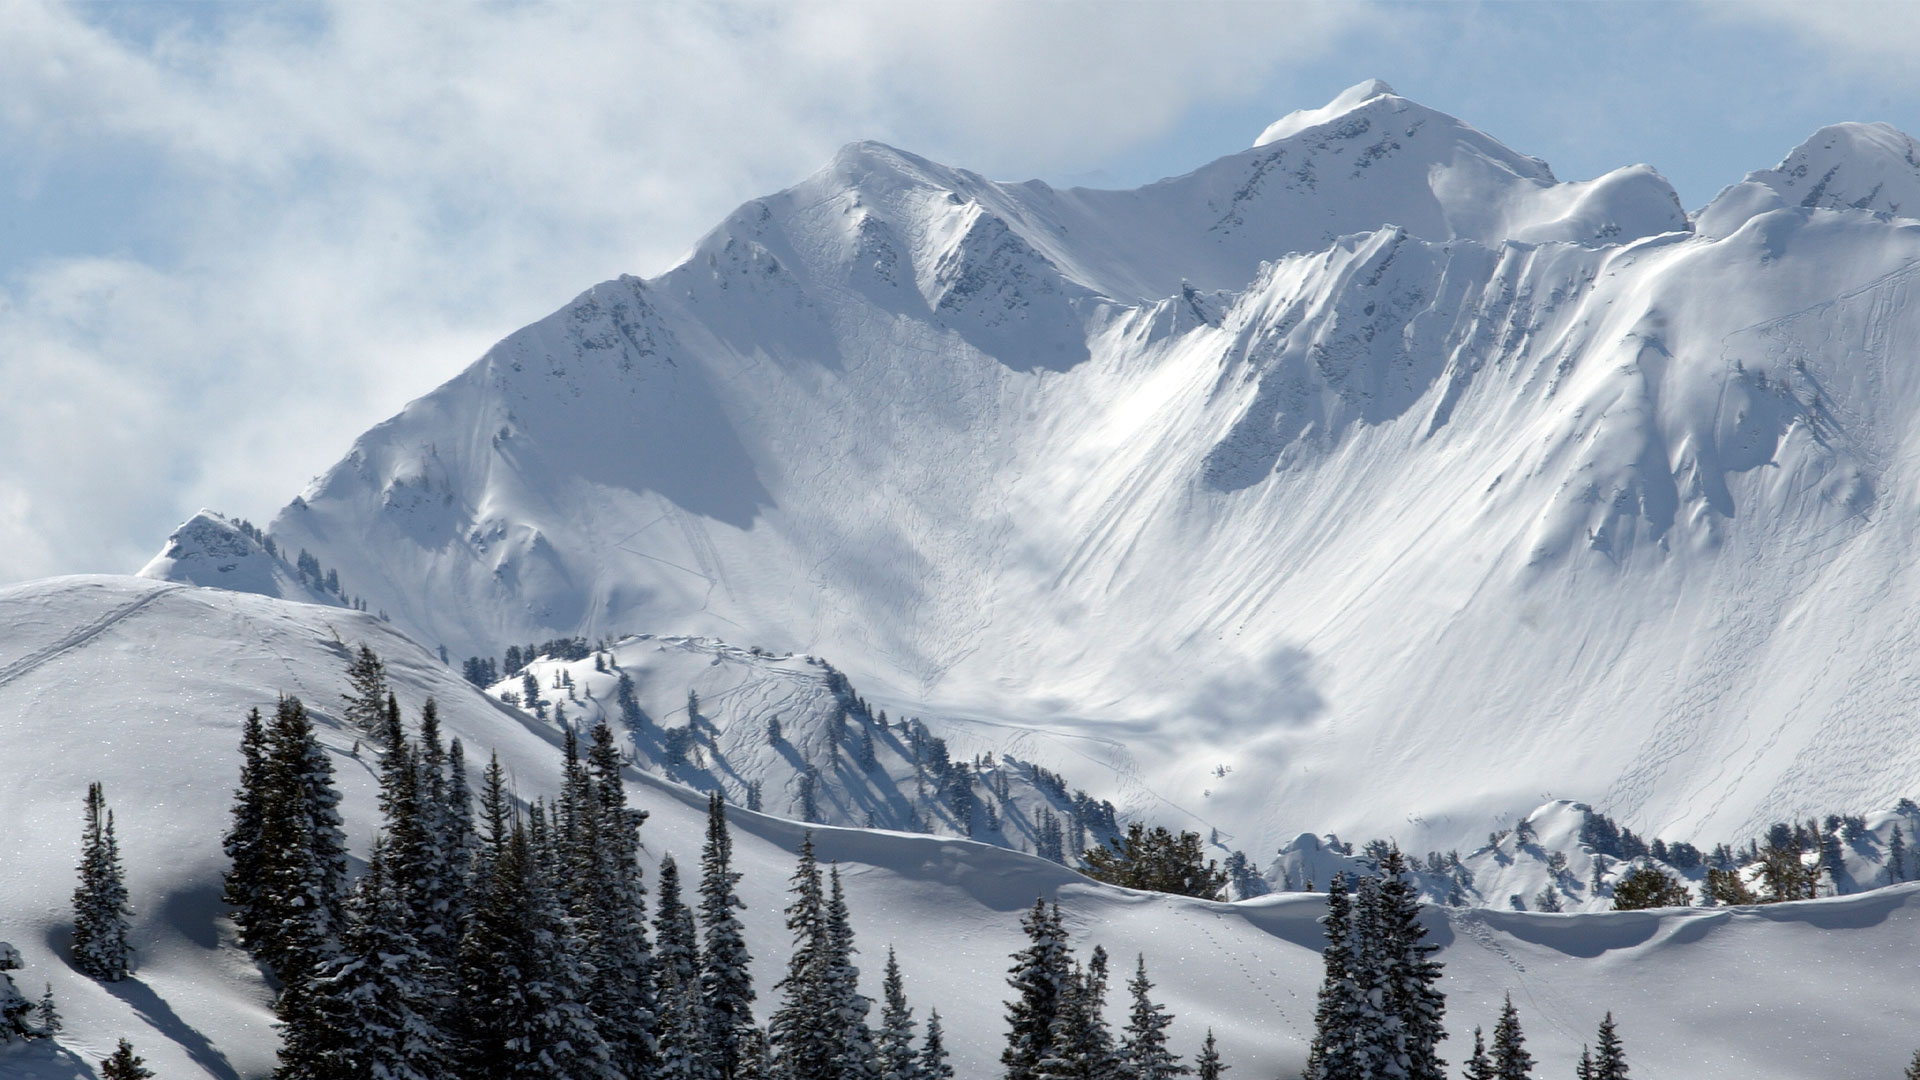 A Winter To Forget | Why Is America Seeing So Many Avalanche Fatalities?